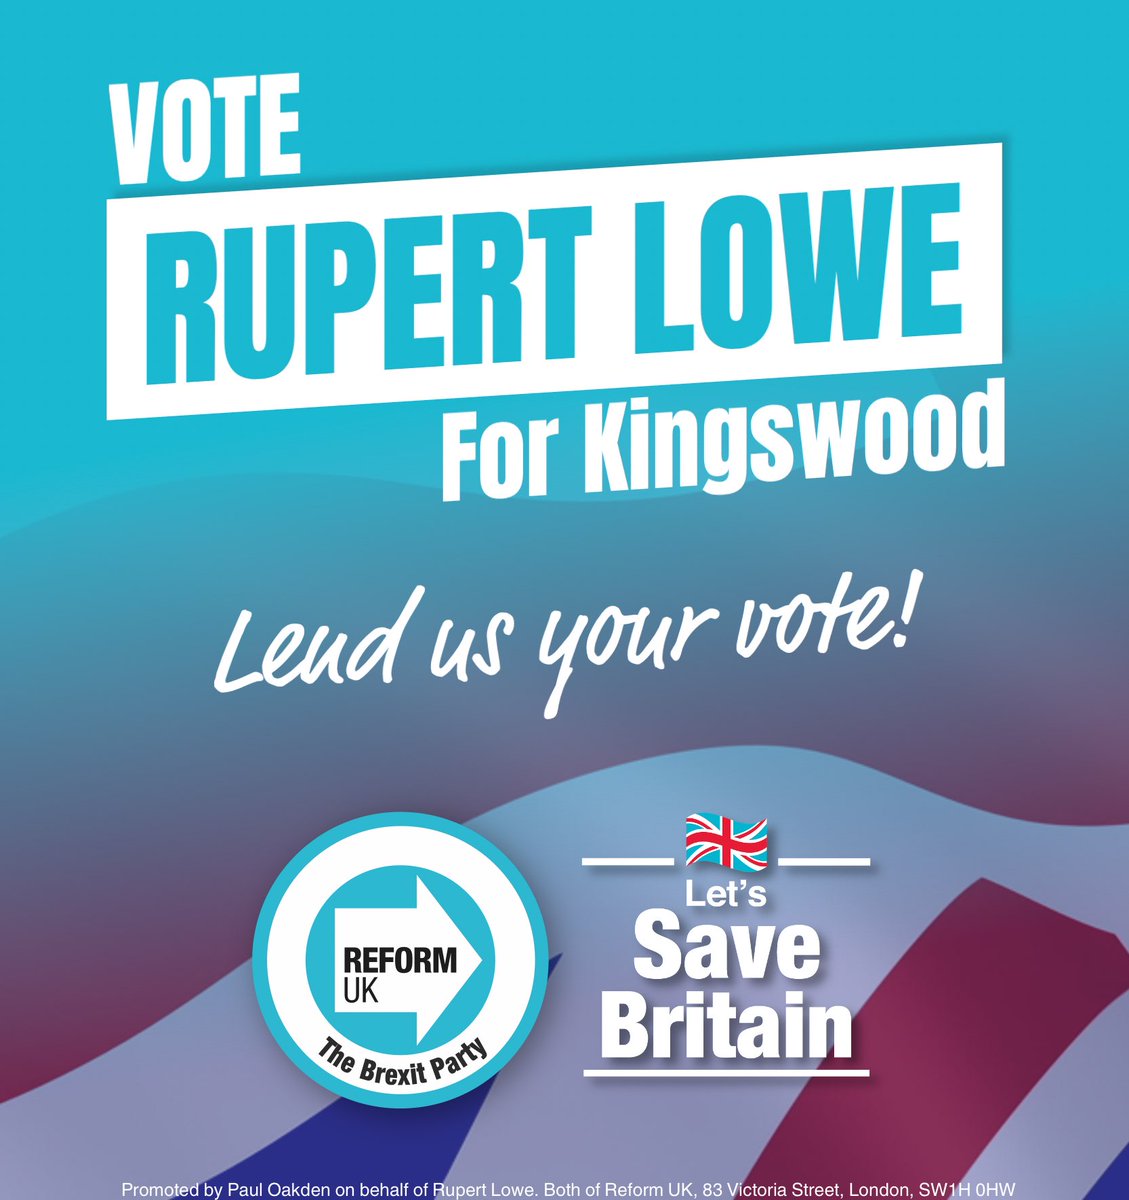 I'm a farmer/businessman from Gloucestershire, standing to let Kingswood send rotten Westminster a message. The constituency will soon be gone, it's a free hit! I've no interest for a career in politics, and have promised my net MP salary to local charities. Lend us your vote!